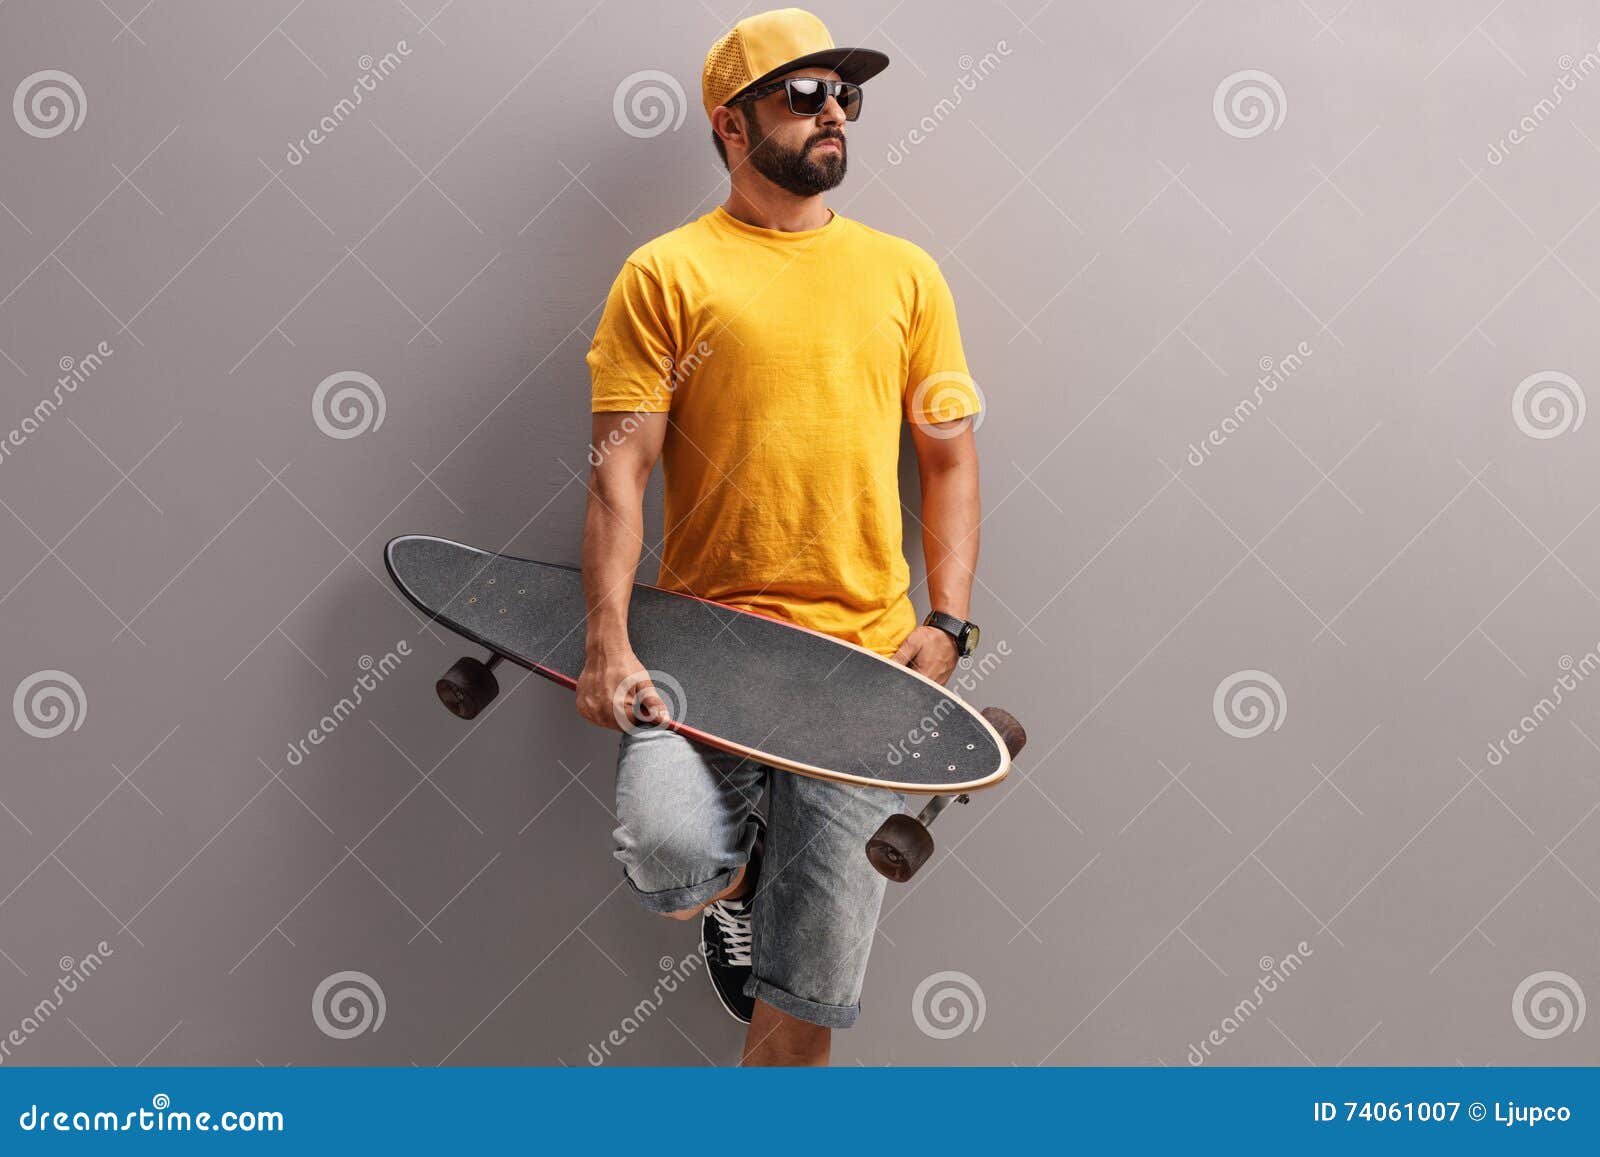 Young Man Holding a Skateboard Stock Image - Image of hipster ...